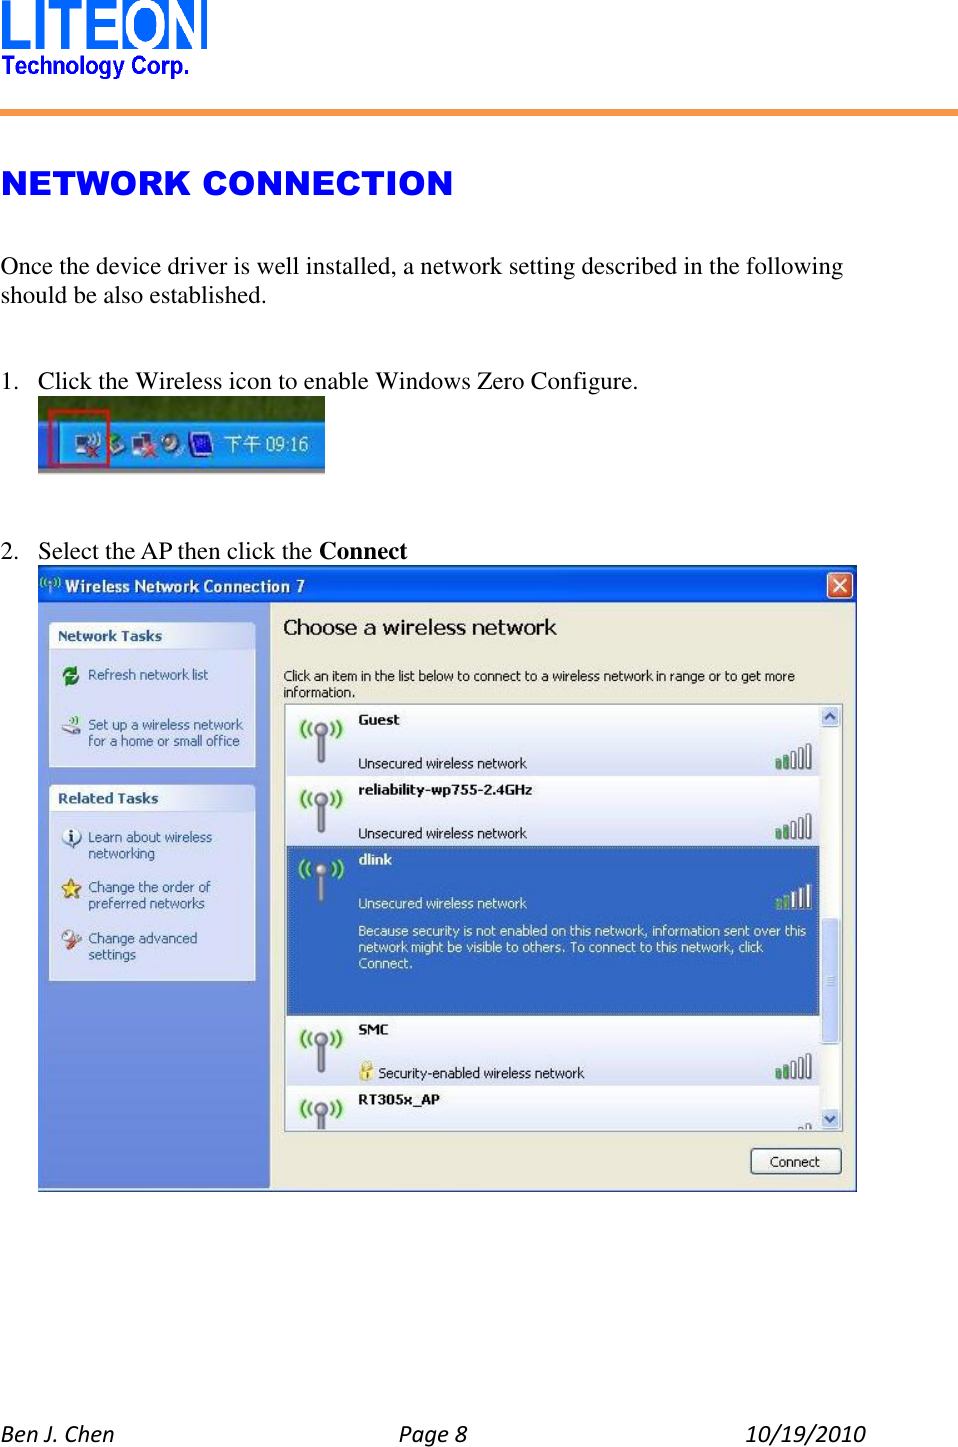   Ben J. Chen  Page 8  10/19/2010    NETWORK CONNECTION  Once the device driver is well installed, a network setting described in the following should be also established.   1. Click the Wireless icon to enable Windows Zero Configure.    2. Select the AP then click the Connect  